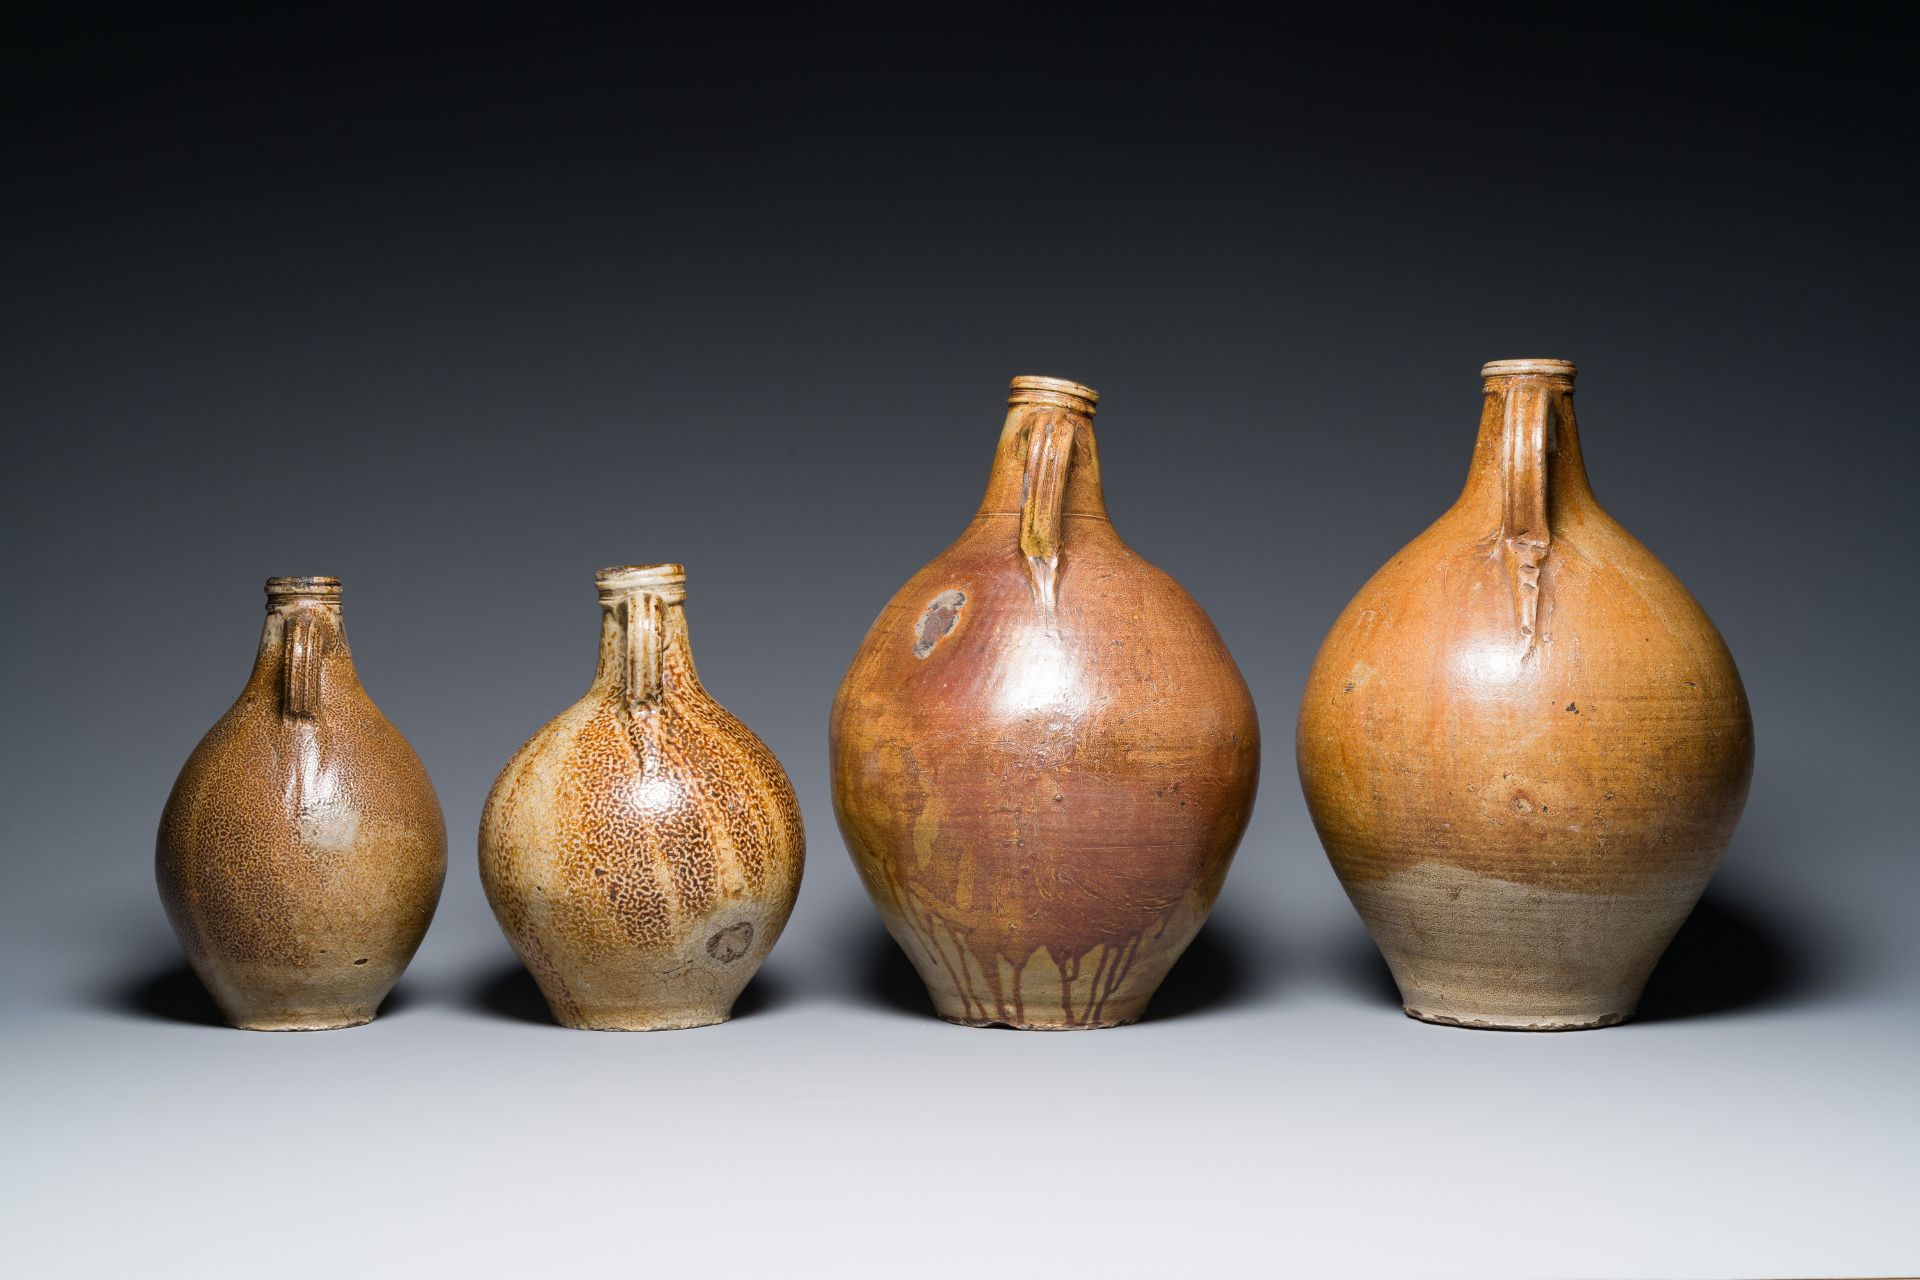 Four stoneware bellarmine jugs with various seals, Frechen and Cologne, Germany, early 17th C. - Image 3 of 7